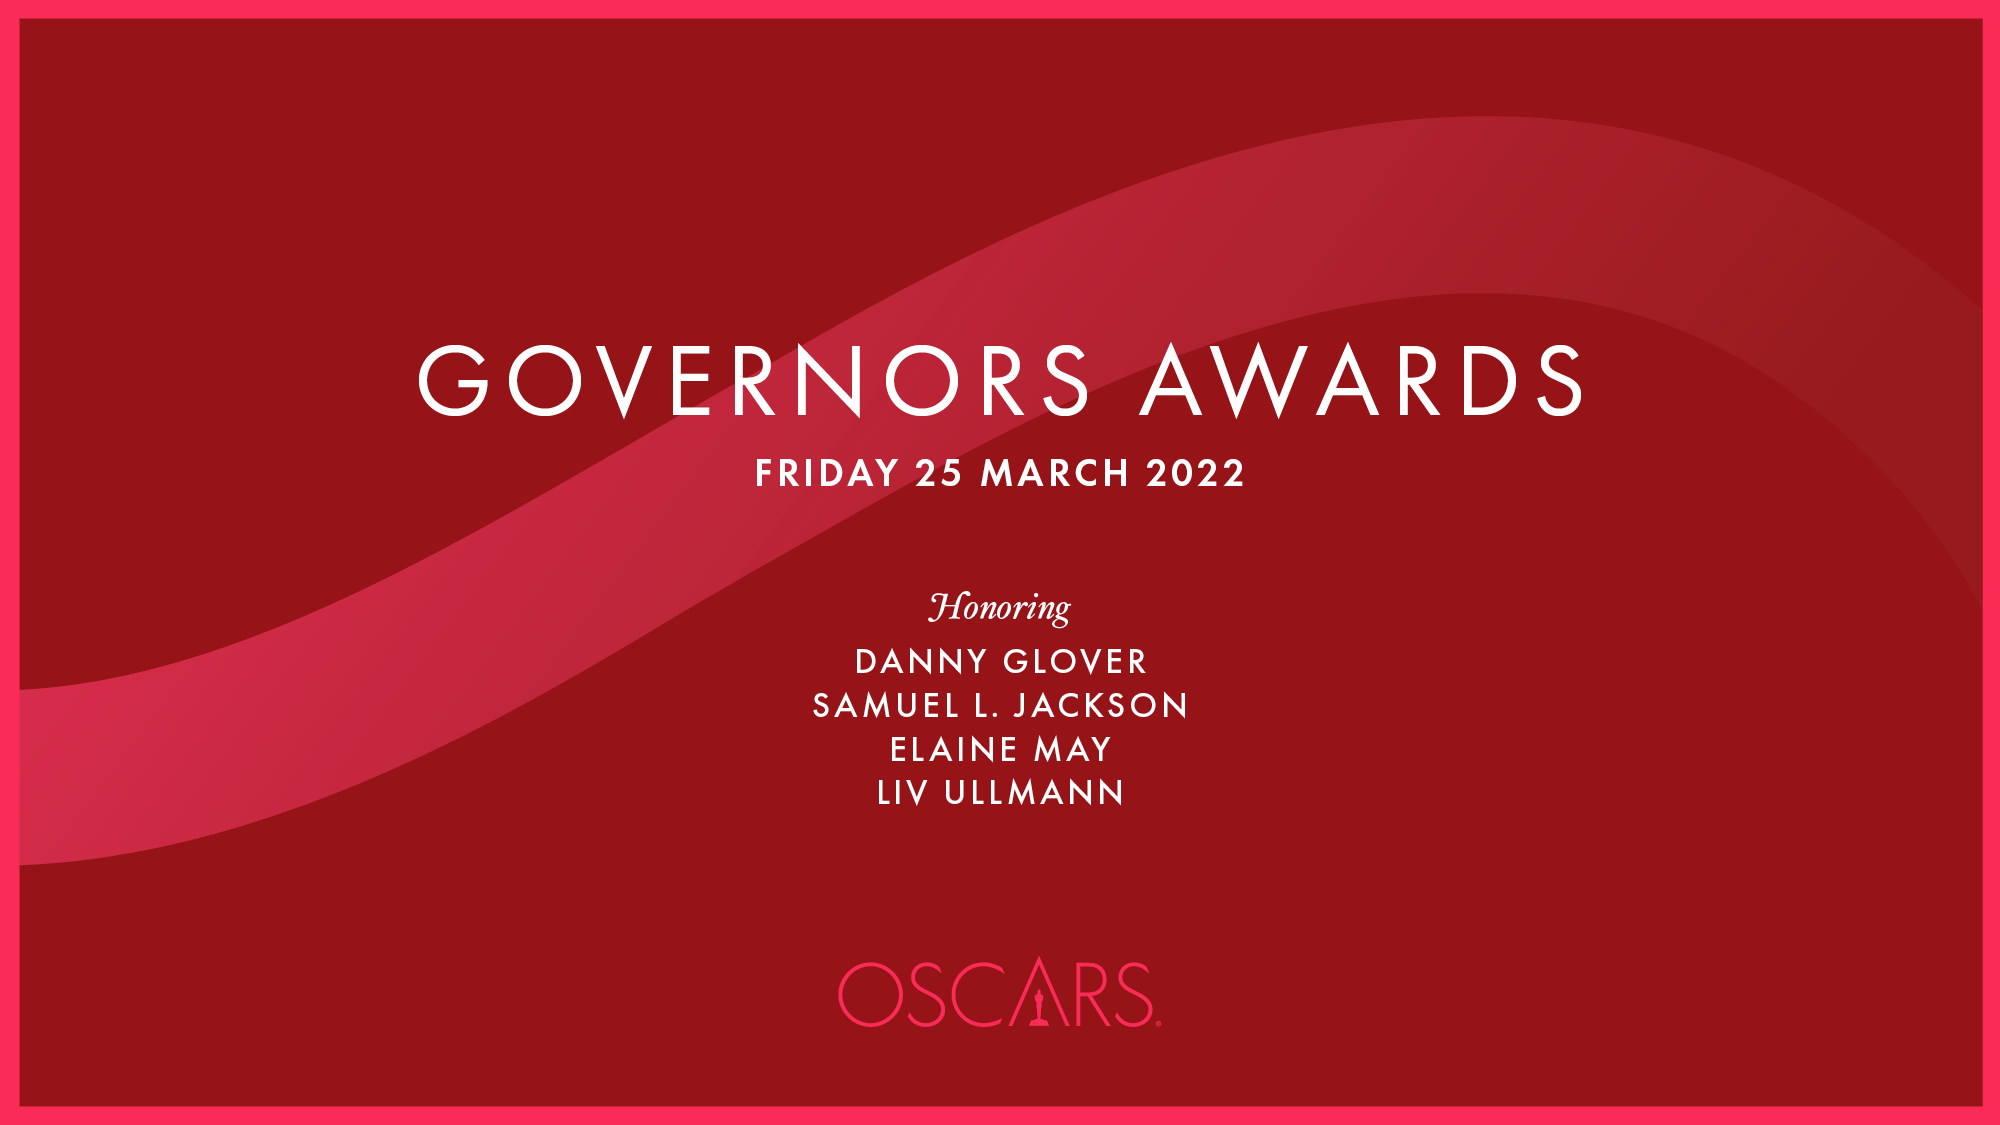 THE ACADEMY ANNOUNCES NEW DATE  FOR 2022 GOVERNORS AWARDS